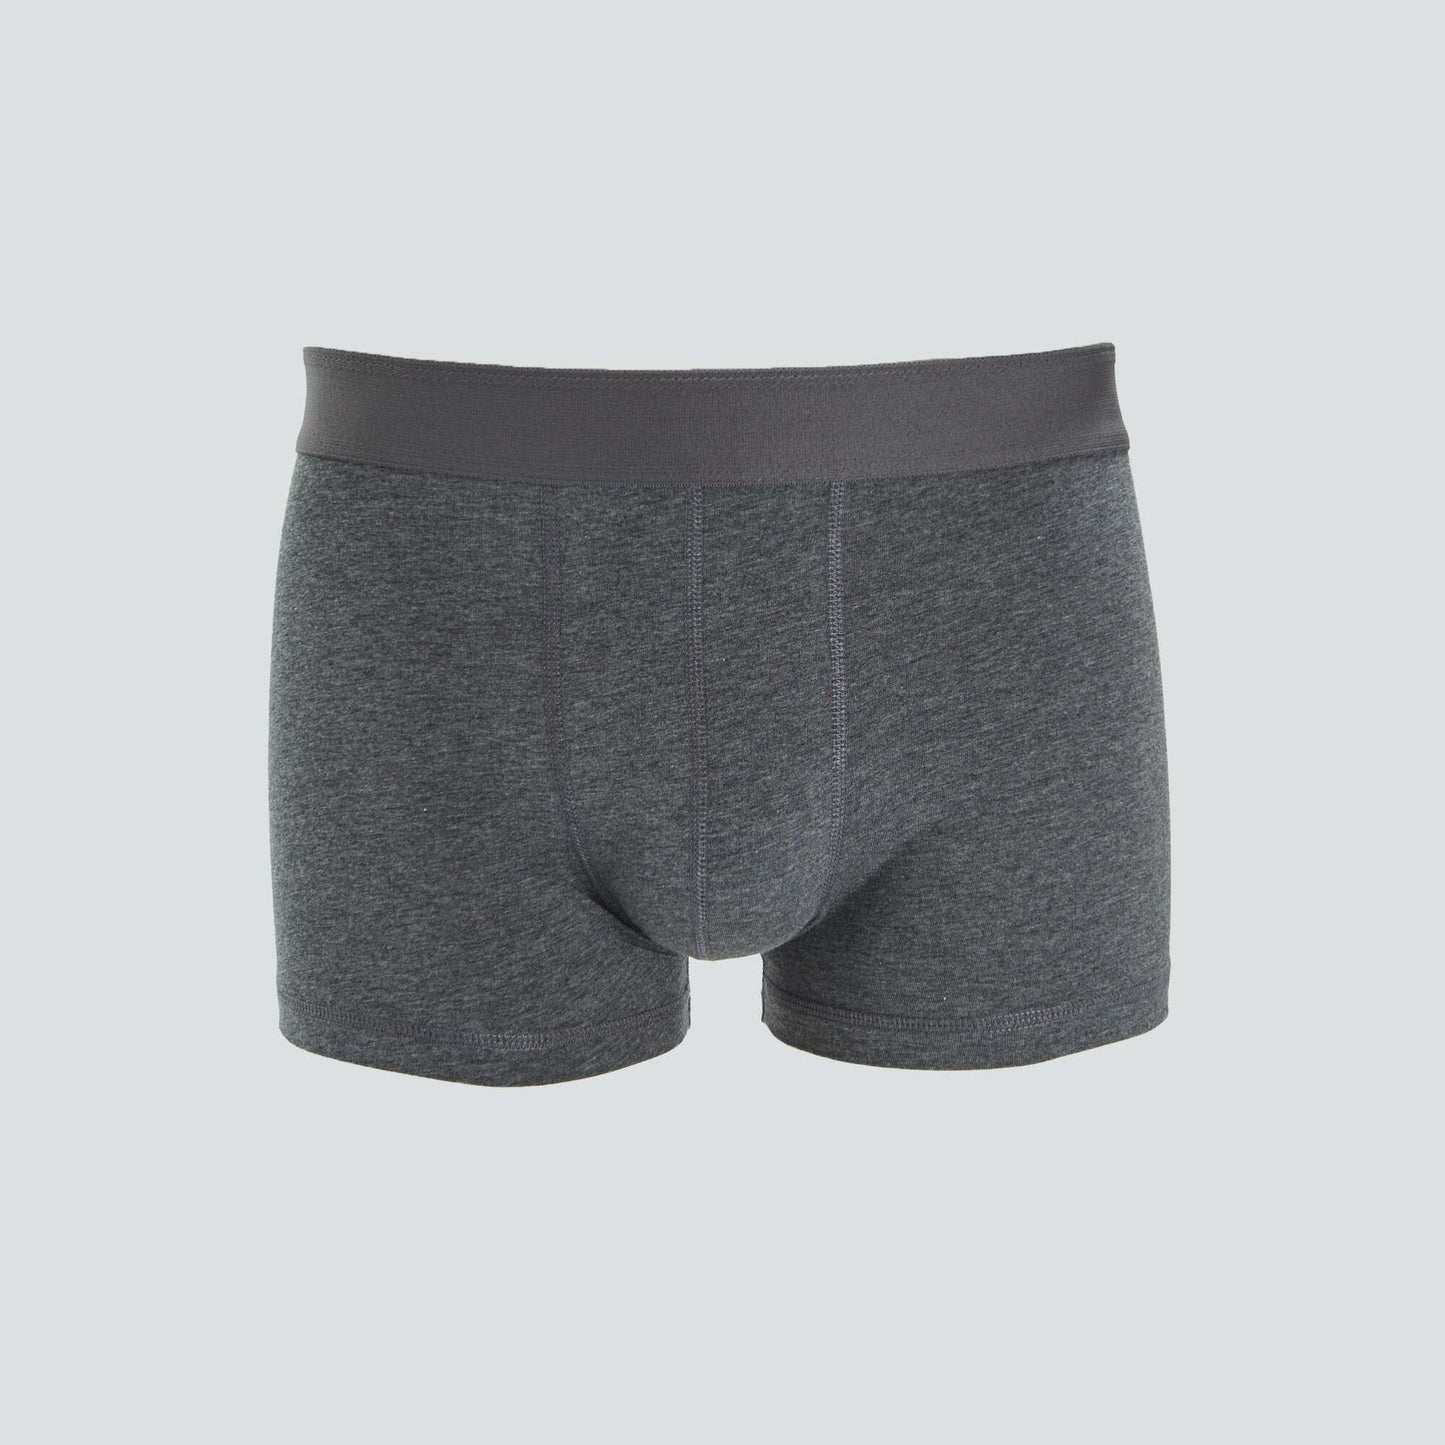 Pack of 3 plain boxers GREEN